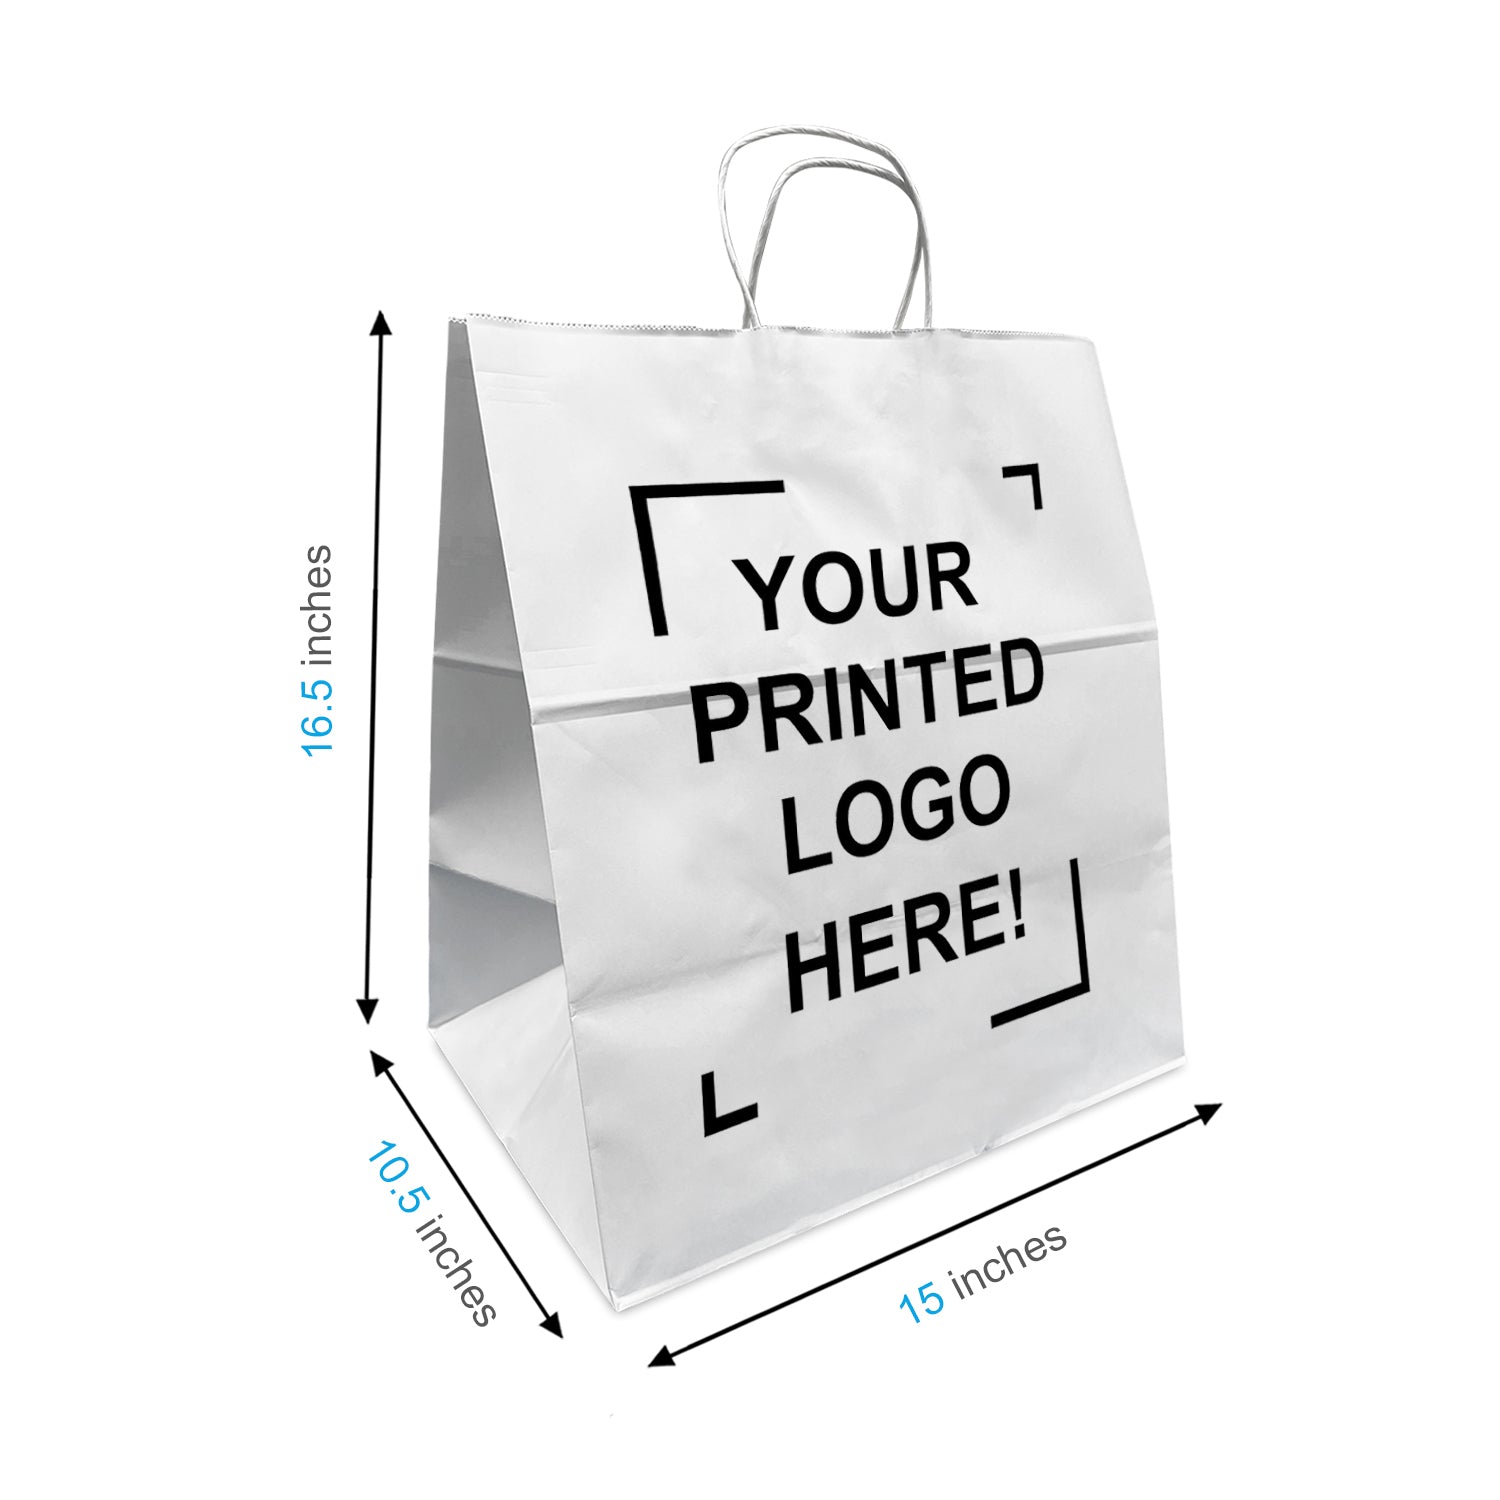 200 Pcs, Dumbo, 15x10.5x16.5 inches, White Paper Bags, with Twisted Handle, Full Color Custom Print